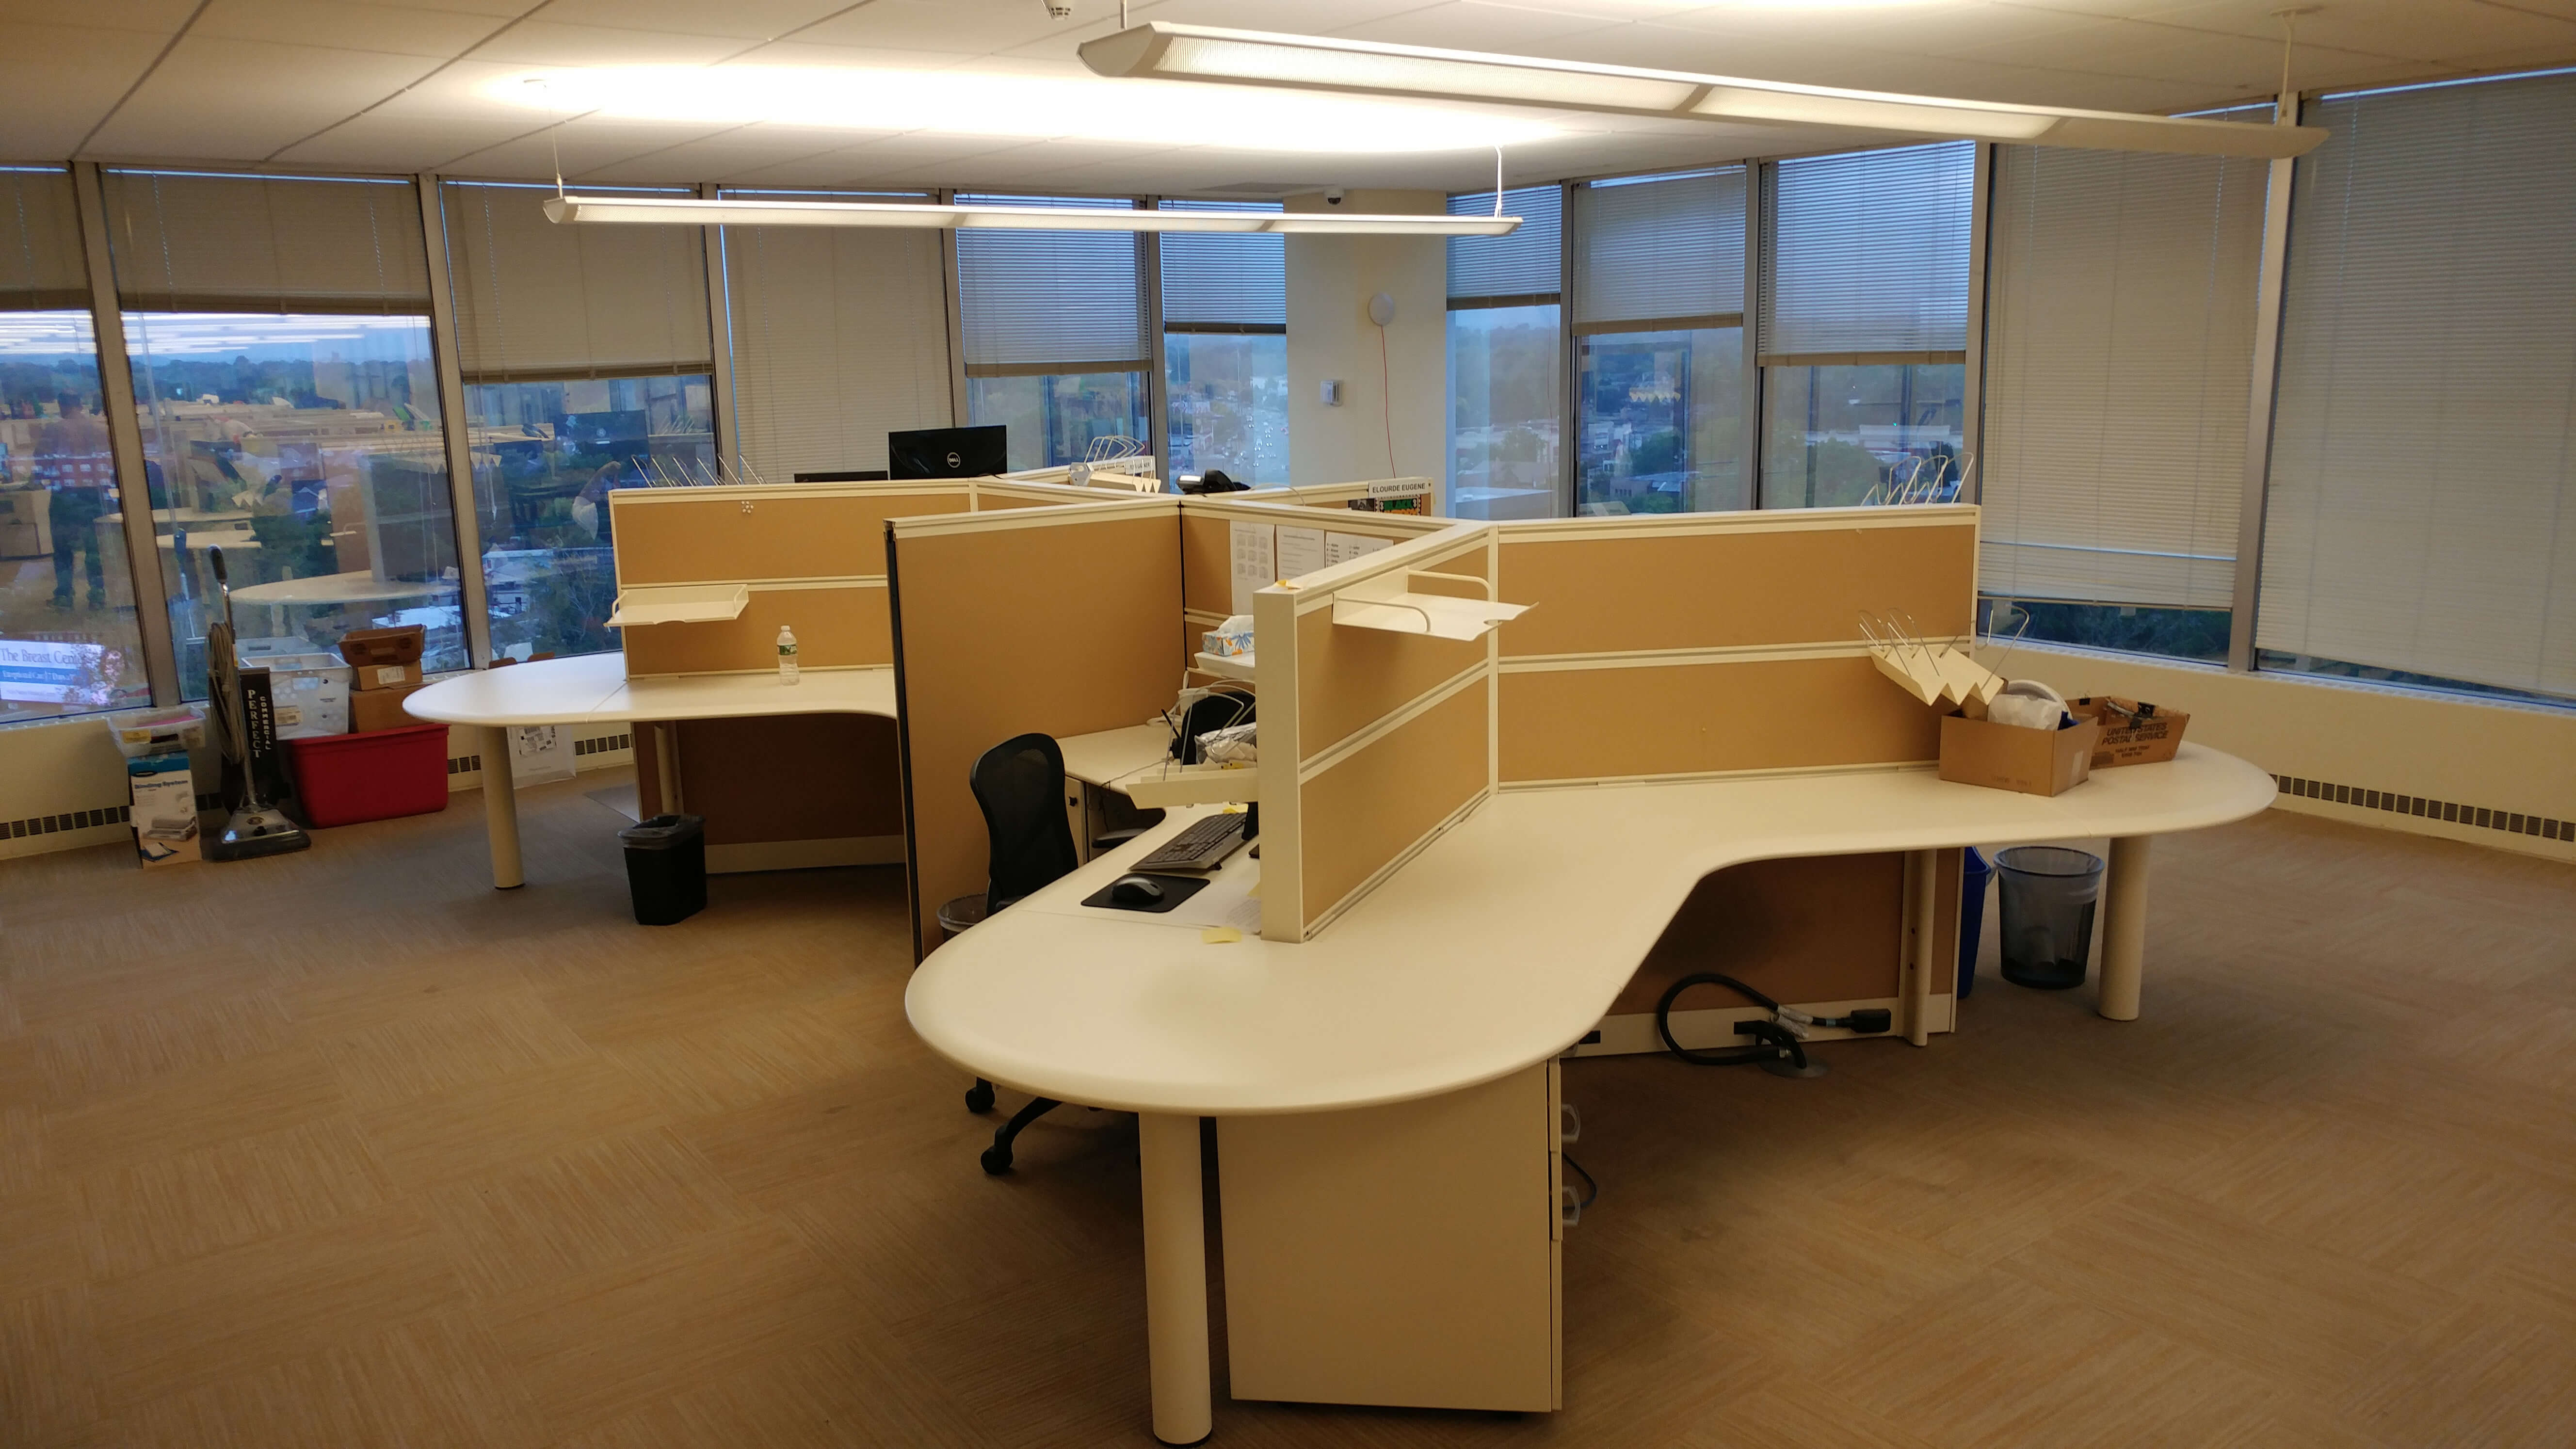 Used Kimball Interworks Cubicles - Meduim Panels - Used Cubicles